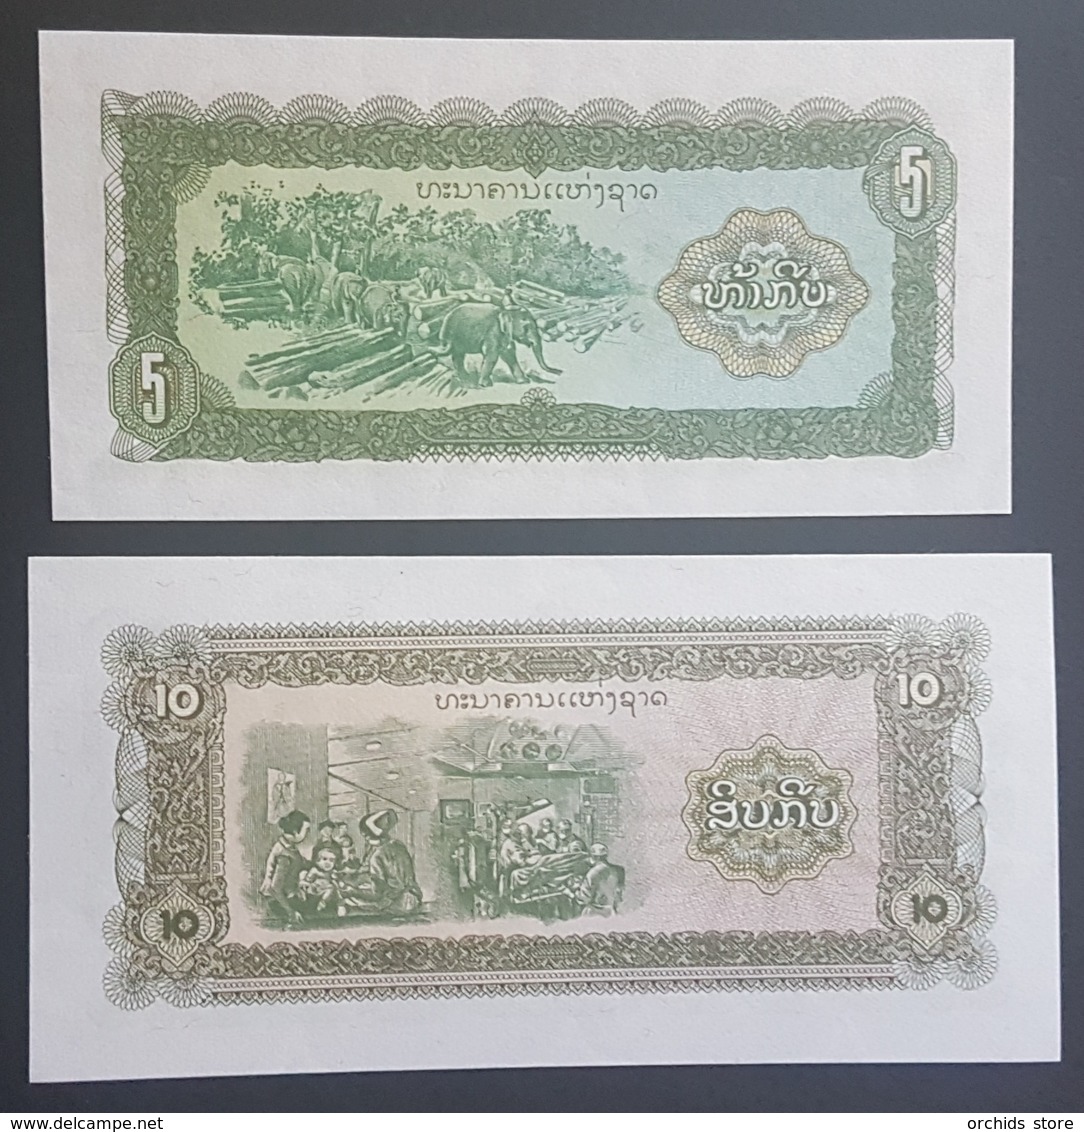 E11g2 - Laos 2 Banknotes, 1988 Issue, 5-10 Kip Both Replacement Notes P26r-27r, RRR, All UNC - Laos